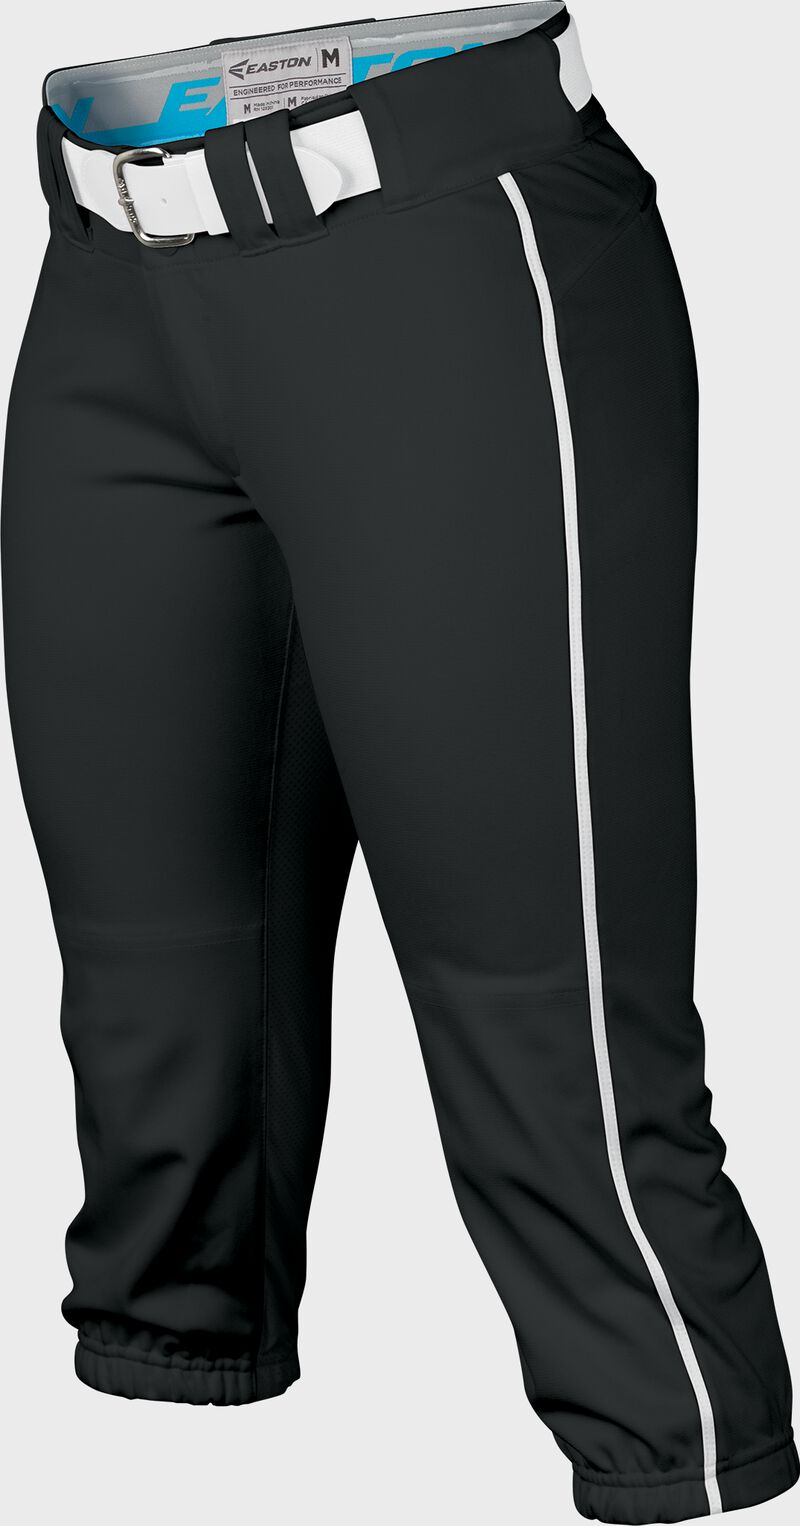 Easton Prowess Softball Pant Women's Piped BLACK/WHITE  XS